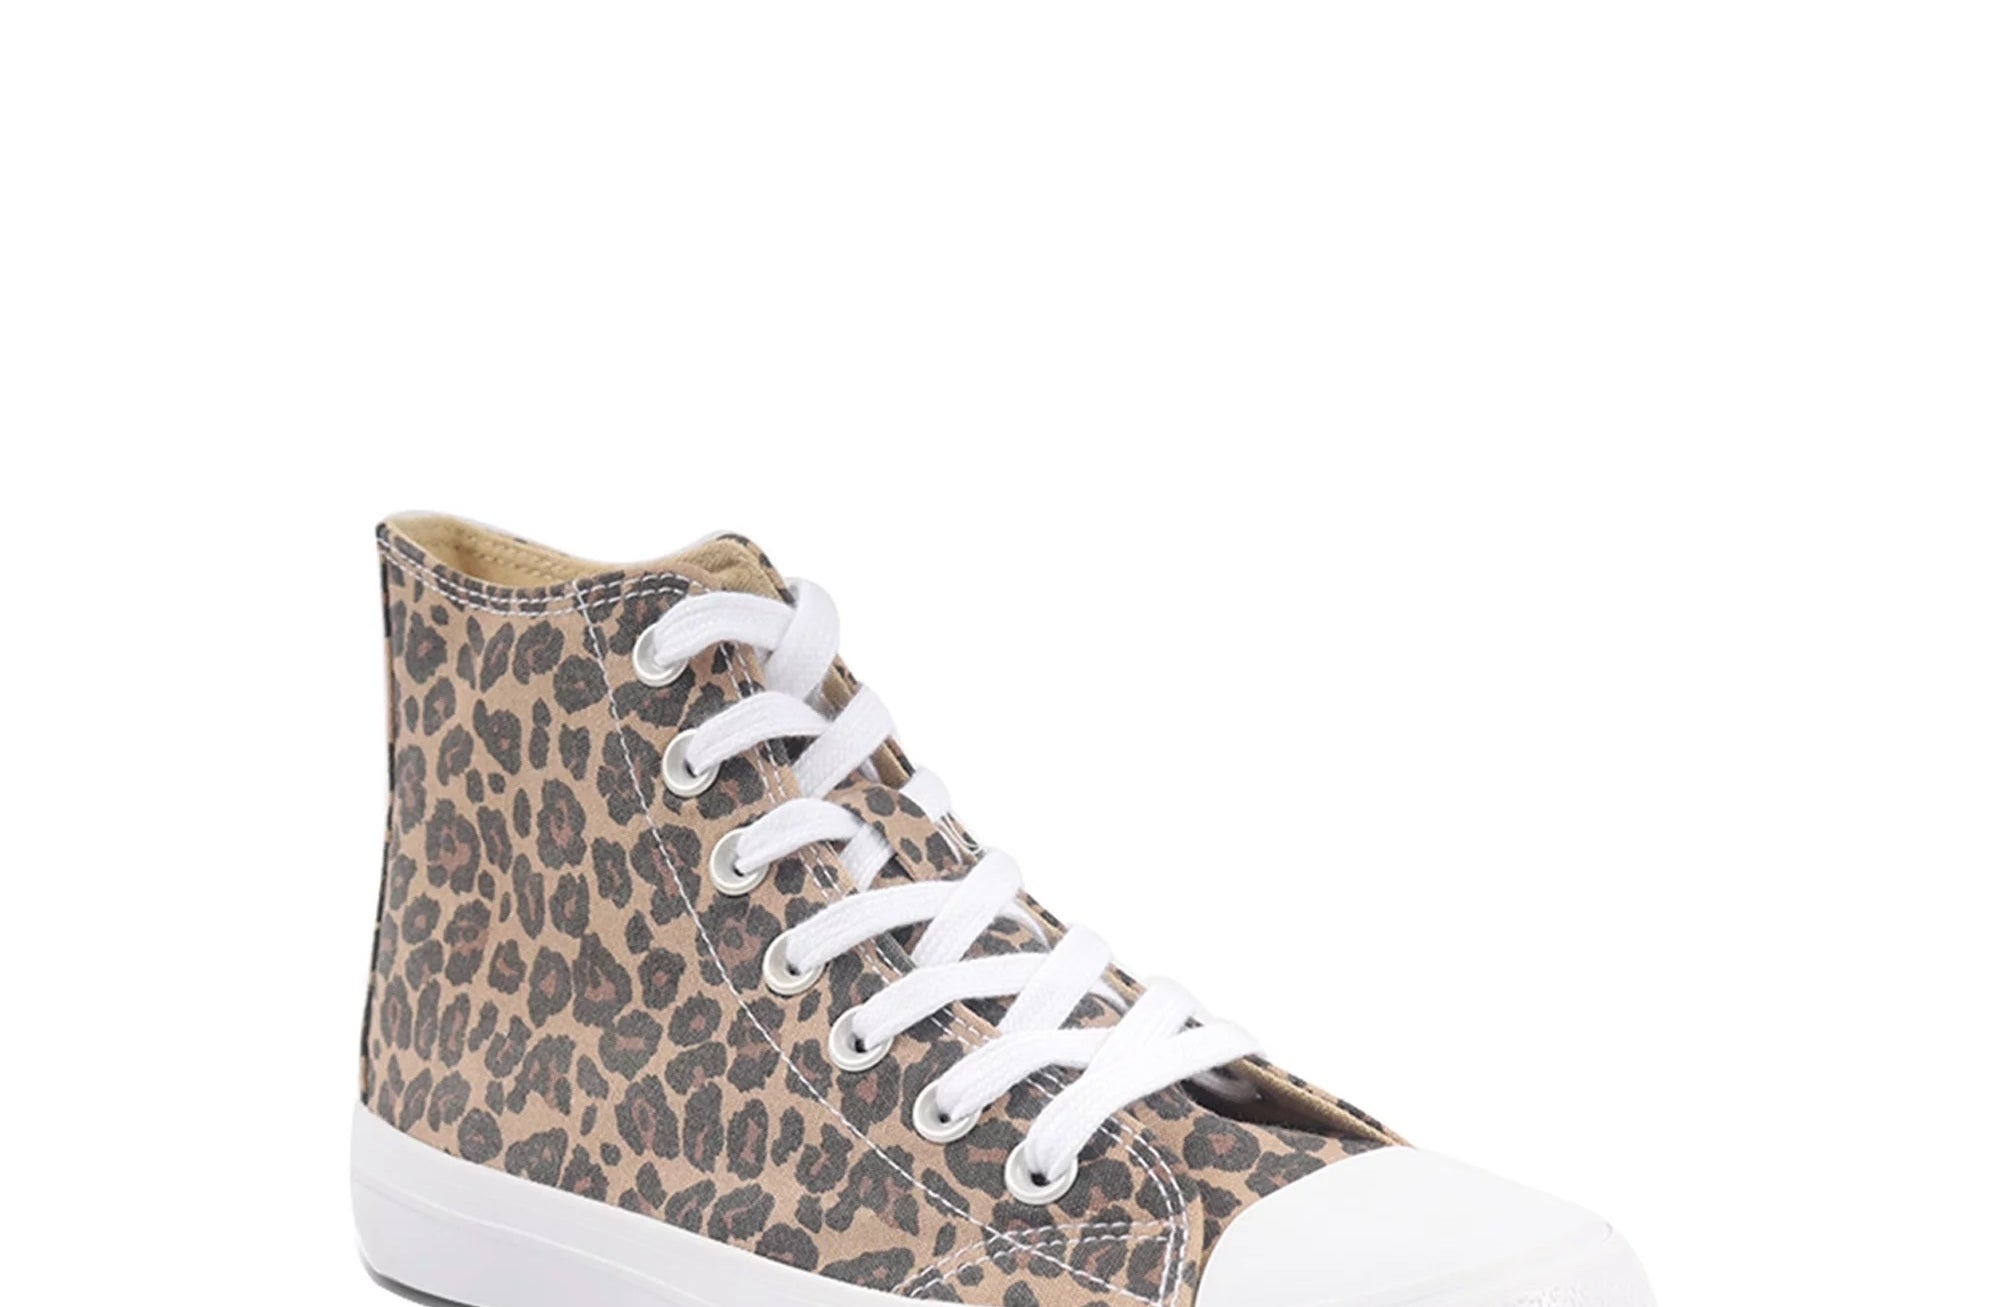 The high top sneakers in leopard print